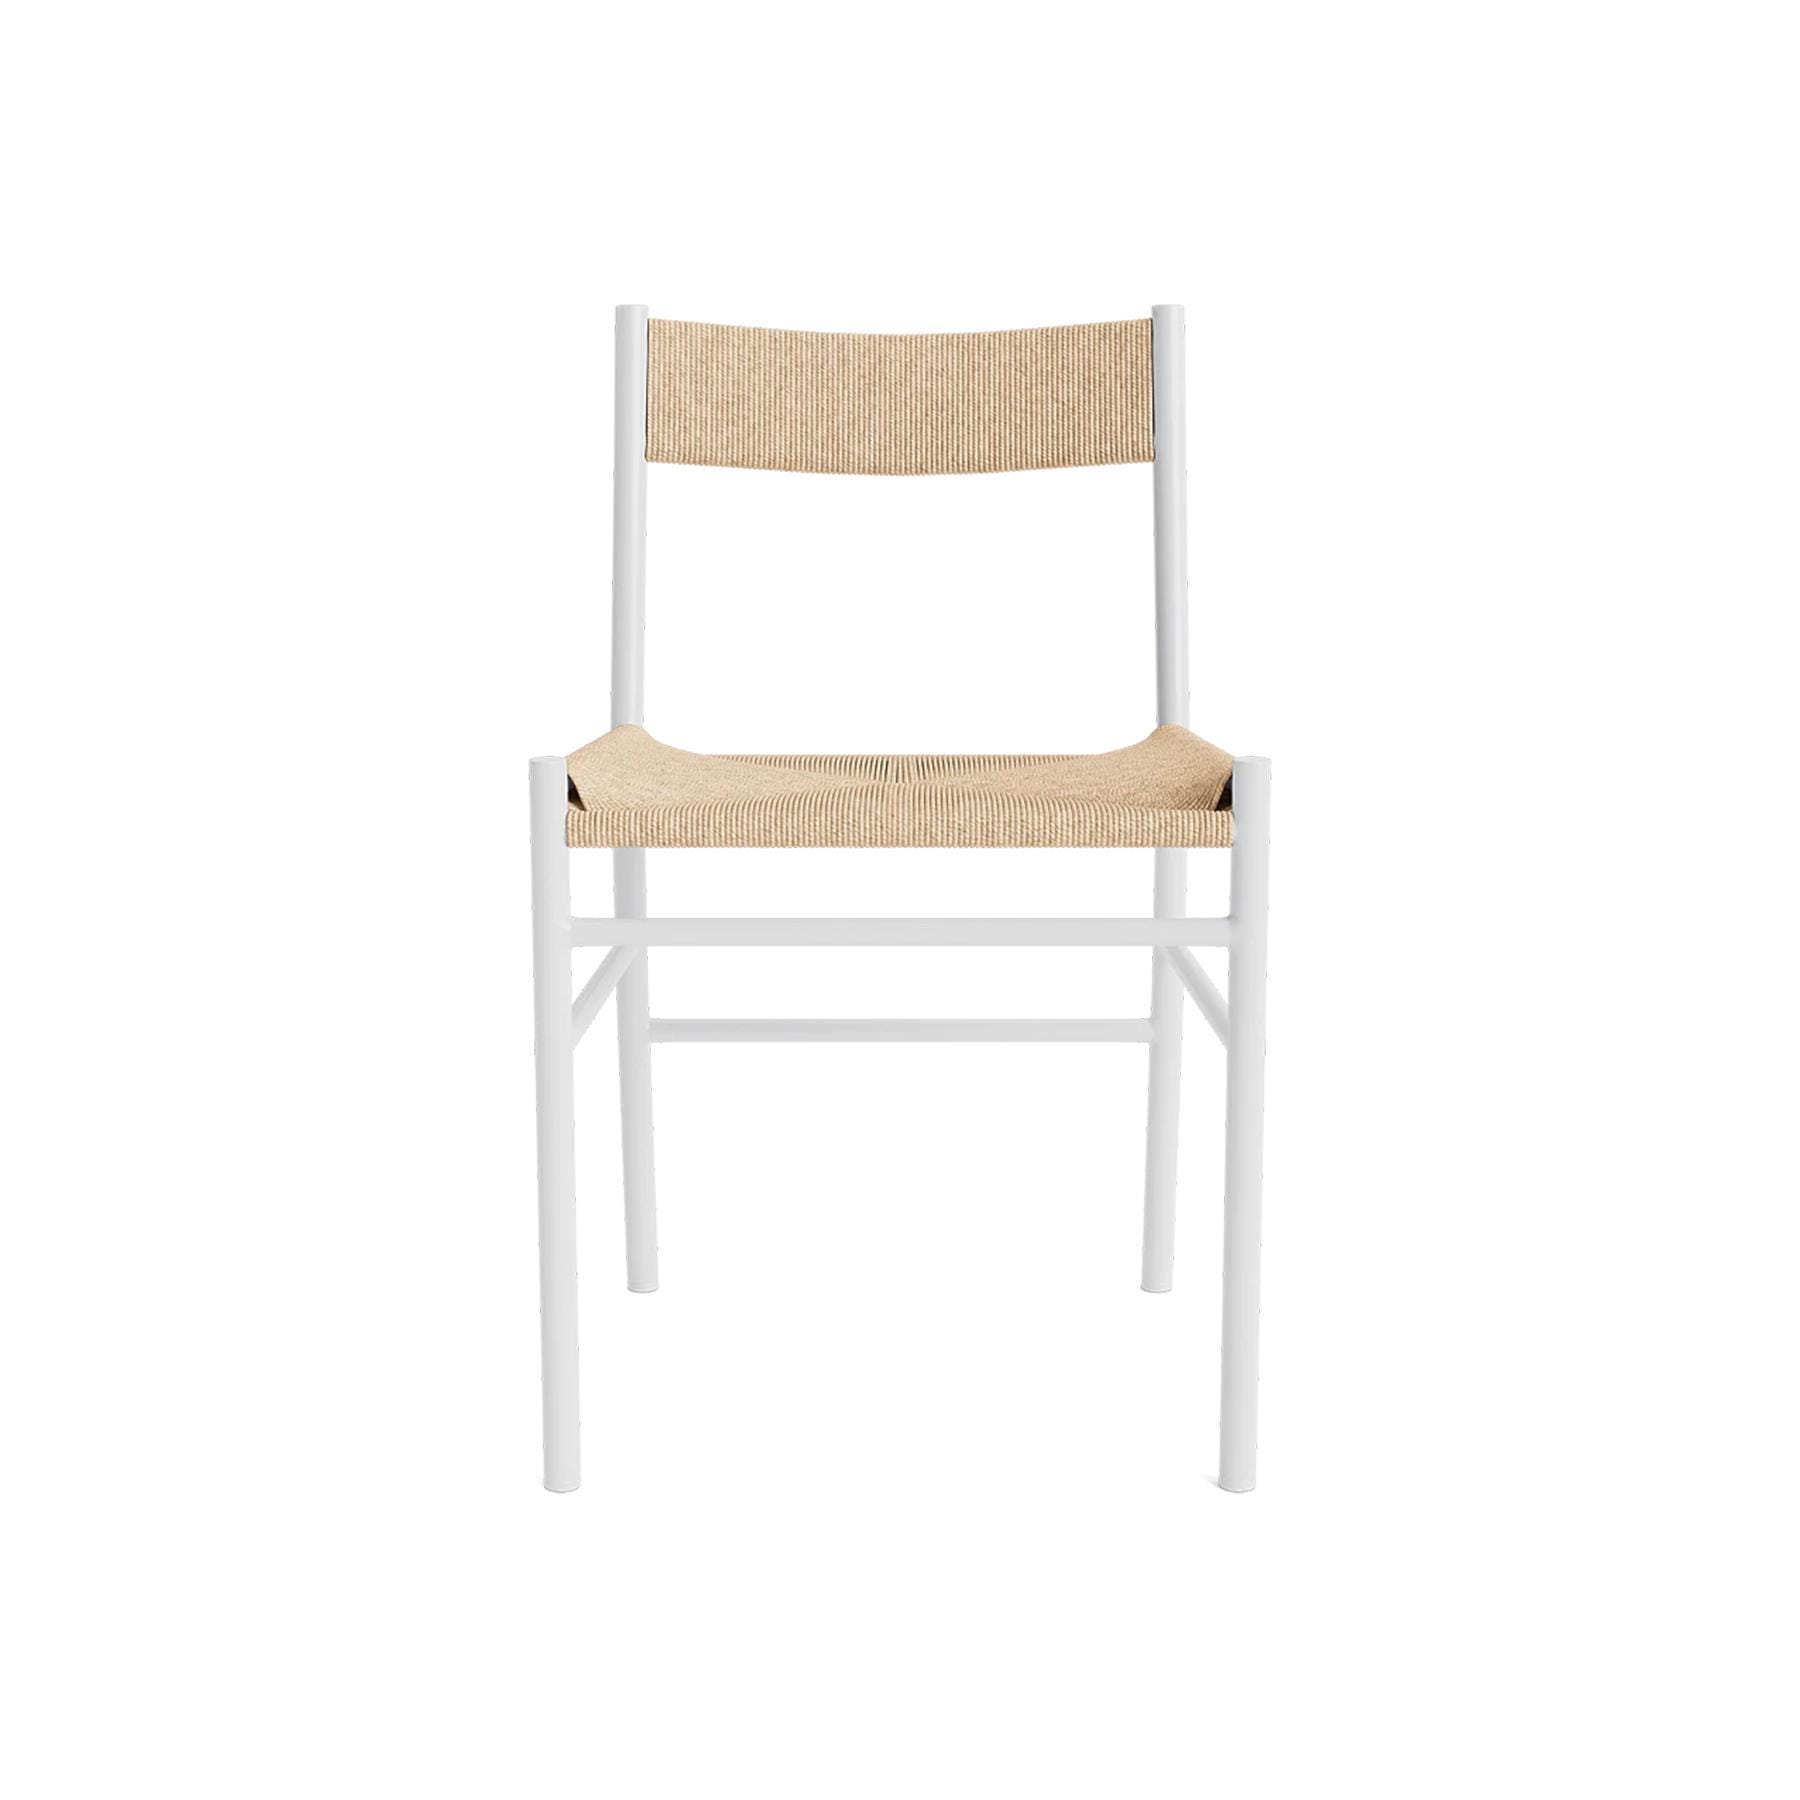 Make Nordic Cord Dining Chair White Steel Frame Without Arm Rests Designer Furniture From Holloways Of Ludlow